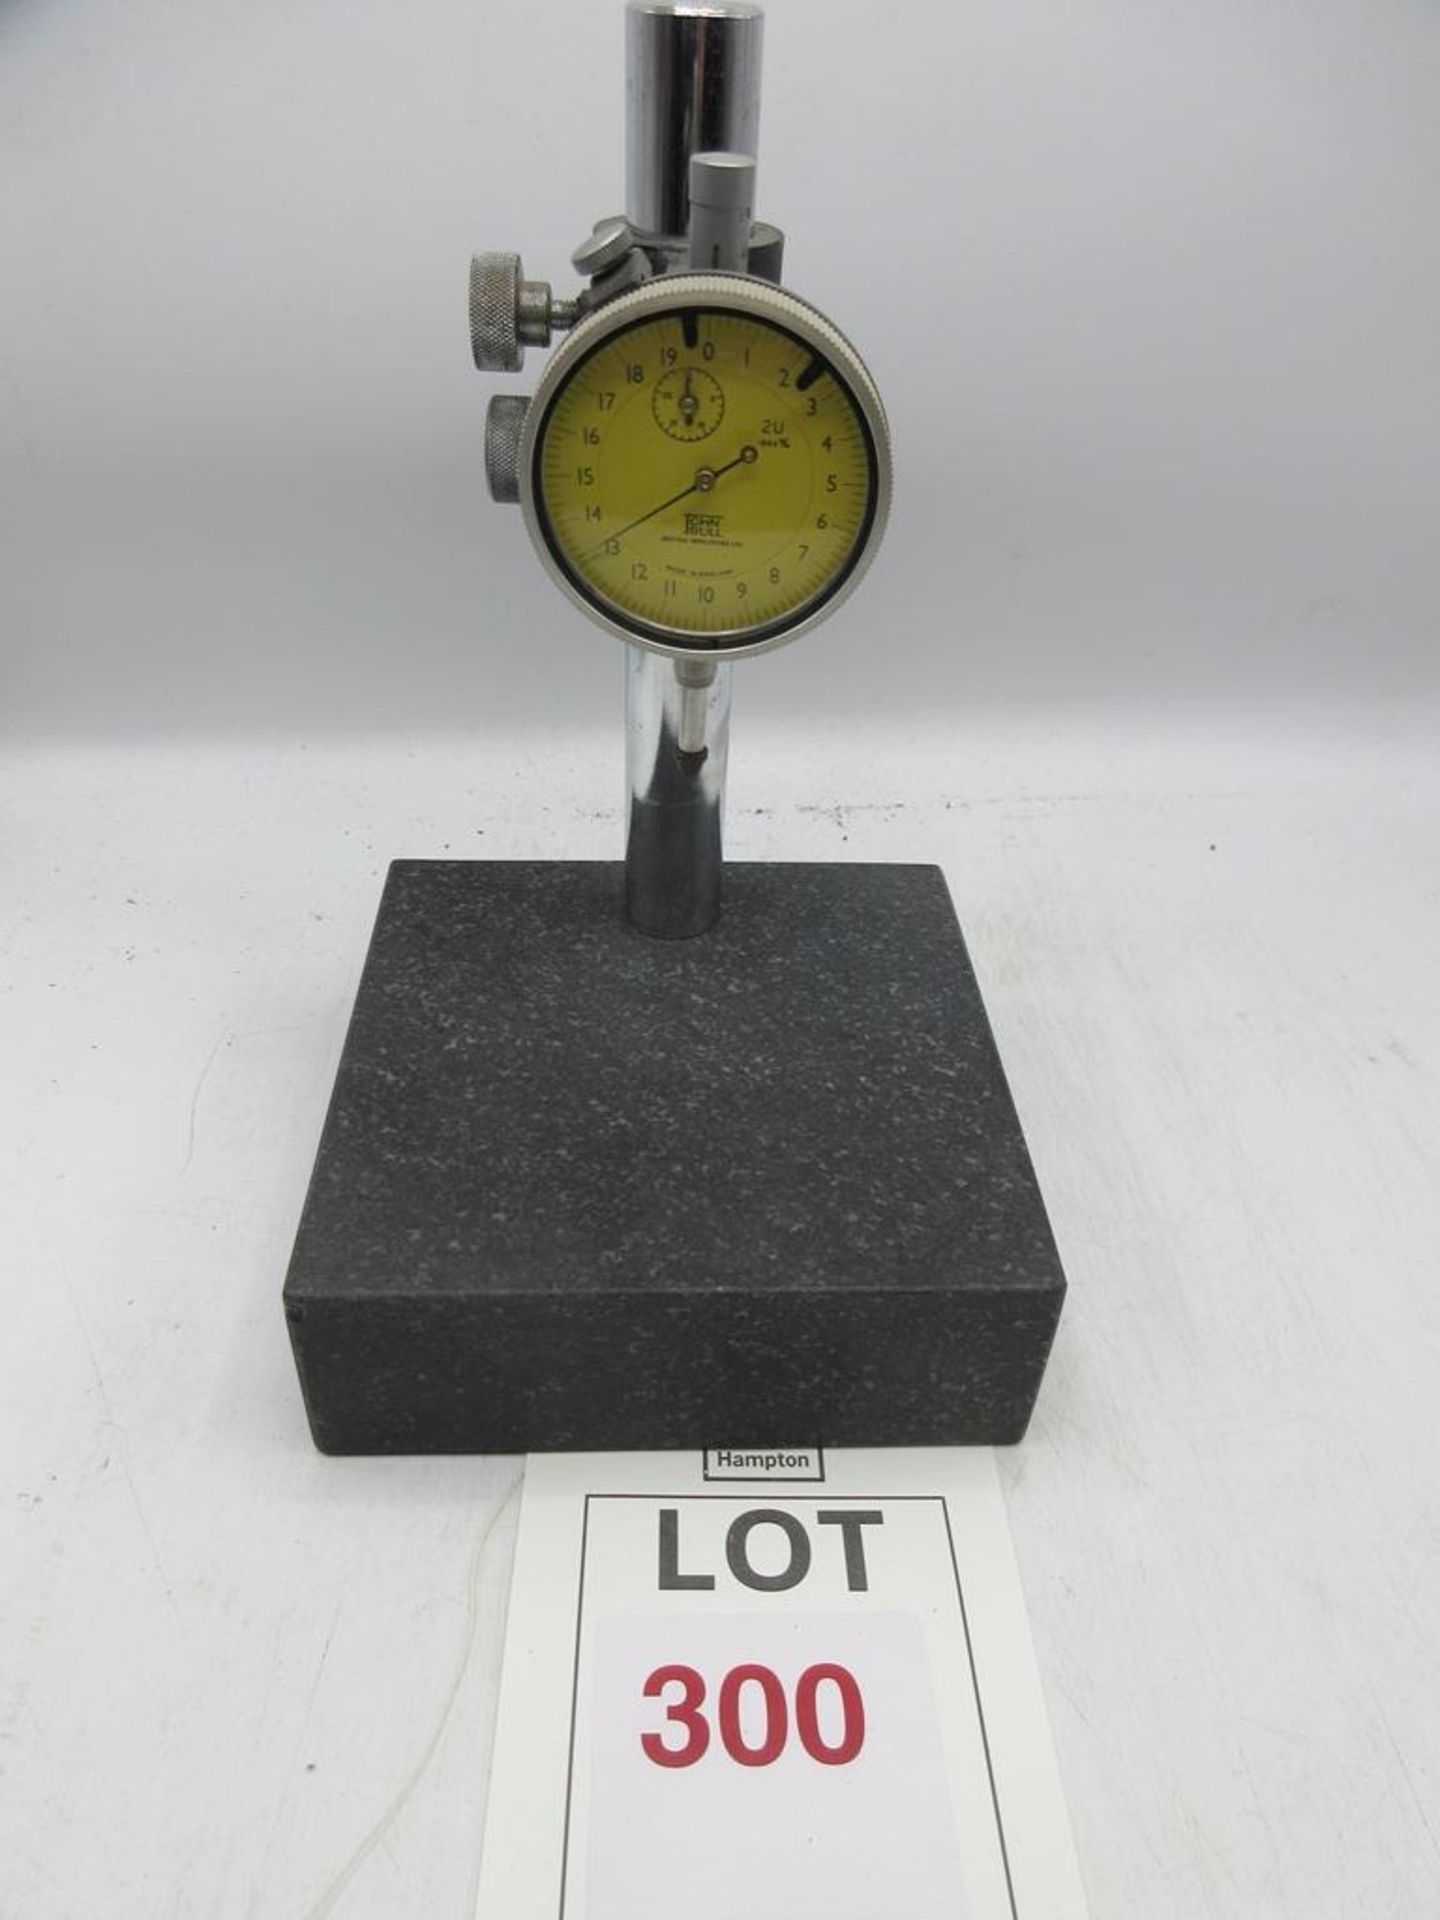 Comparator stand and indicator